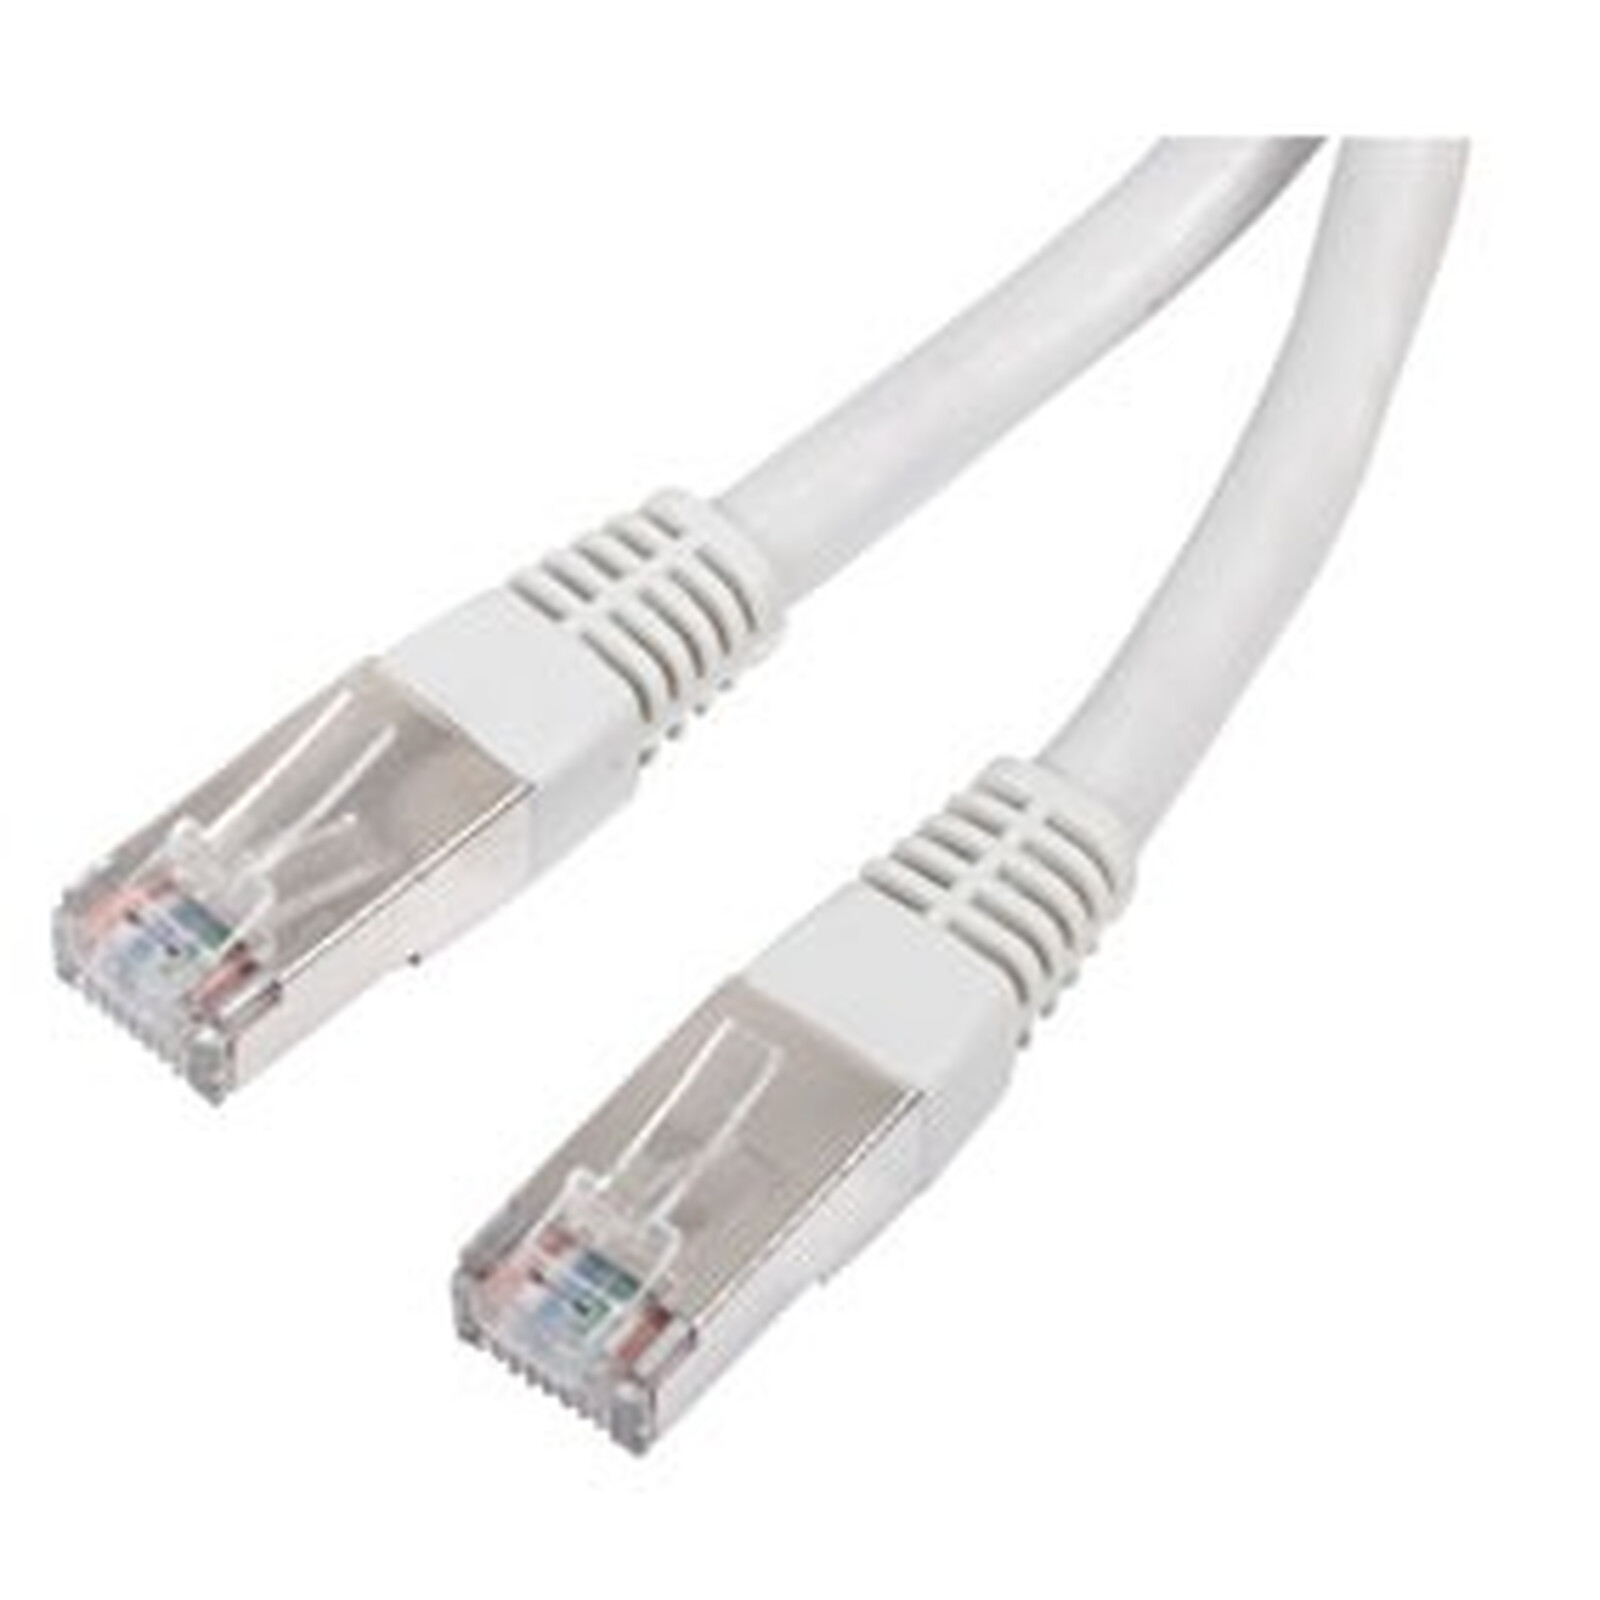 Cable real E-NET 600-2 (15 m) - Cable RJ45 - LDLC